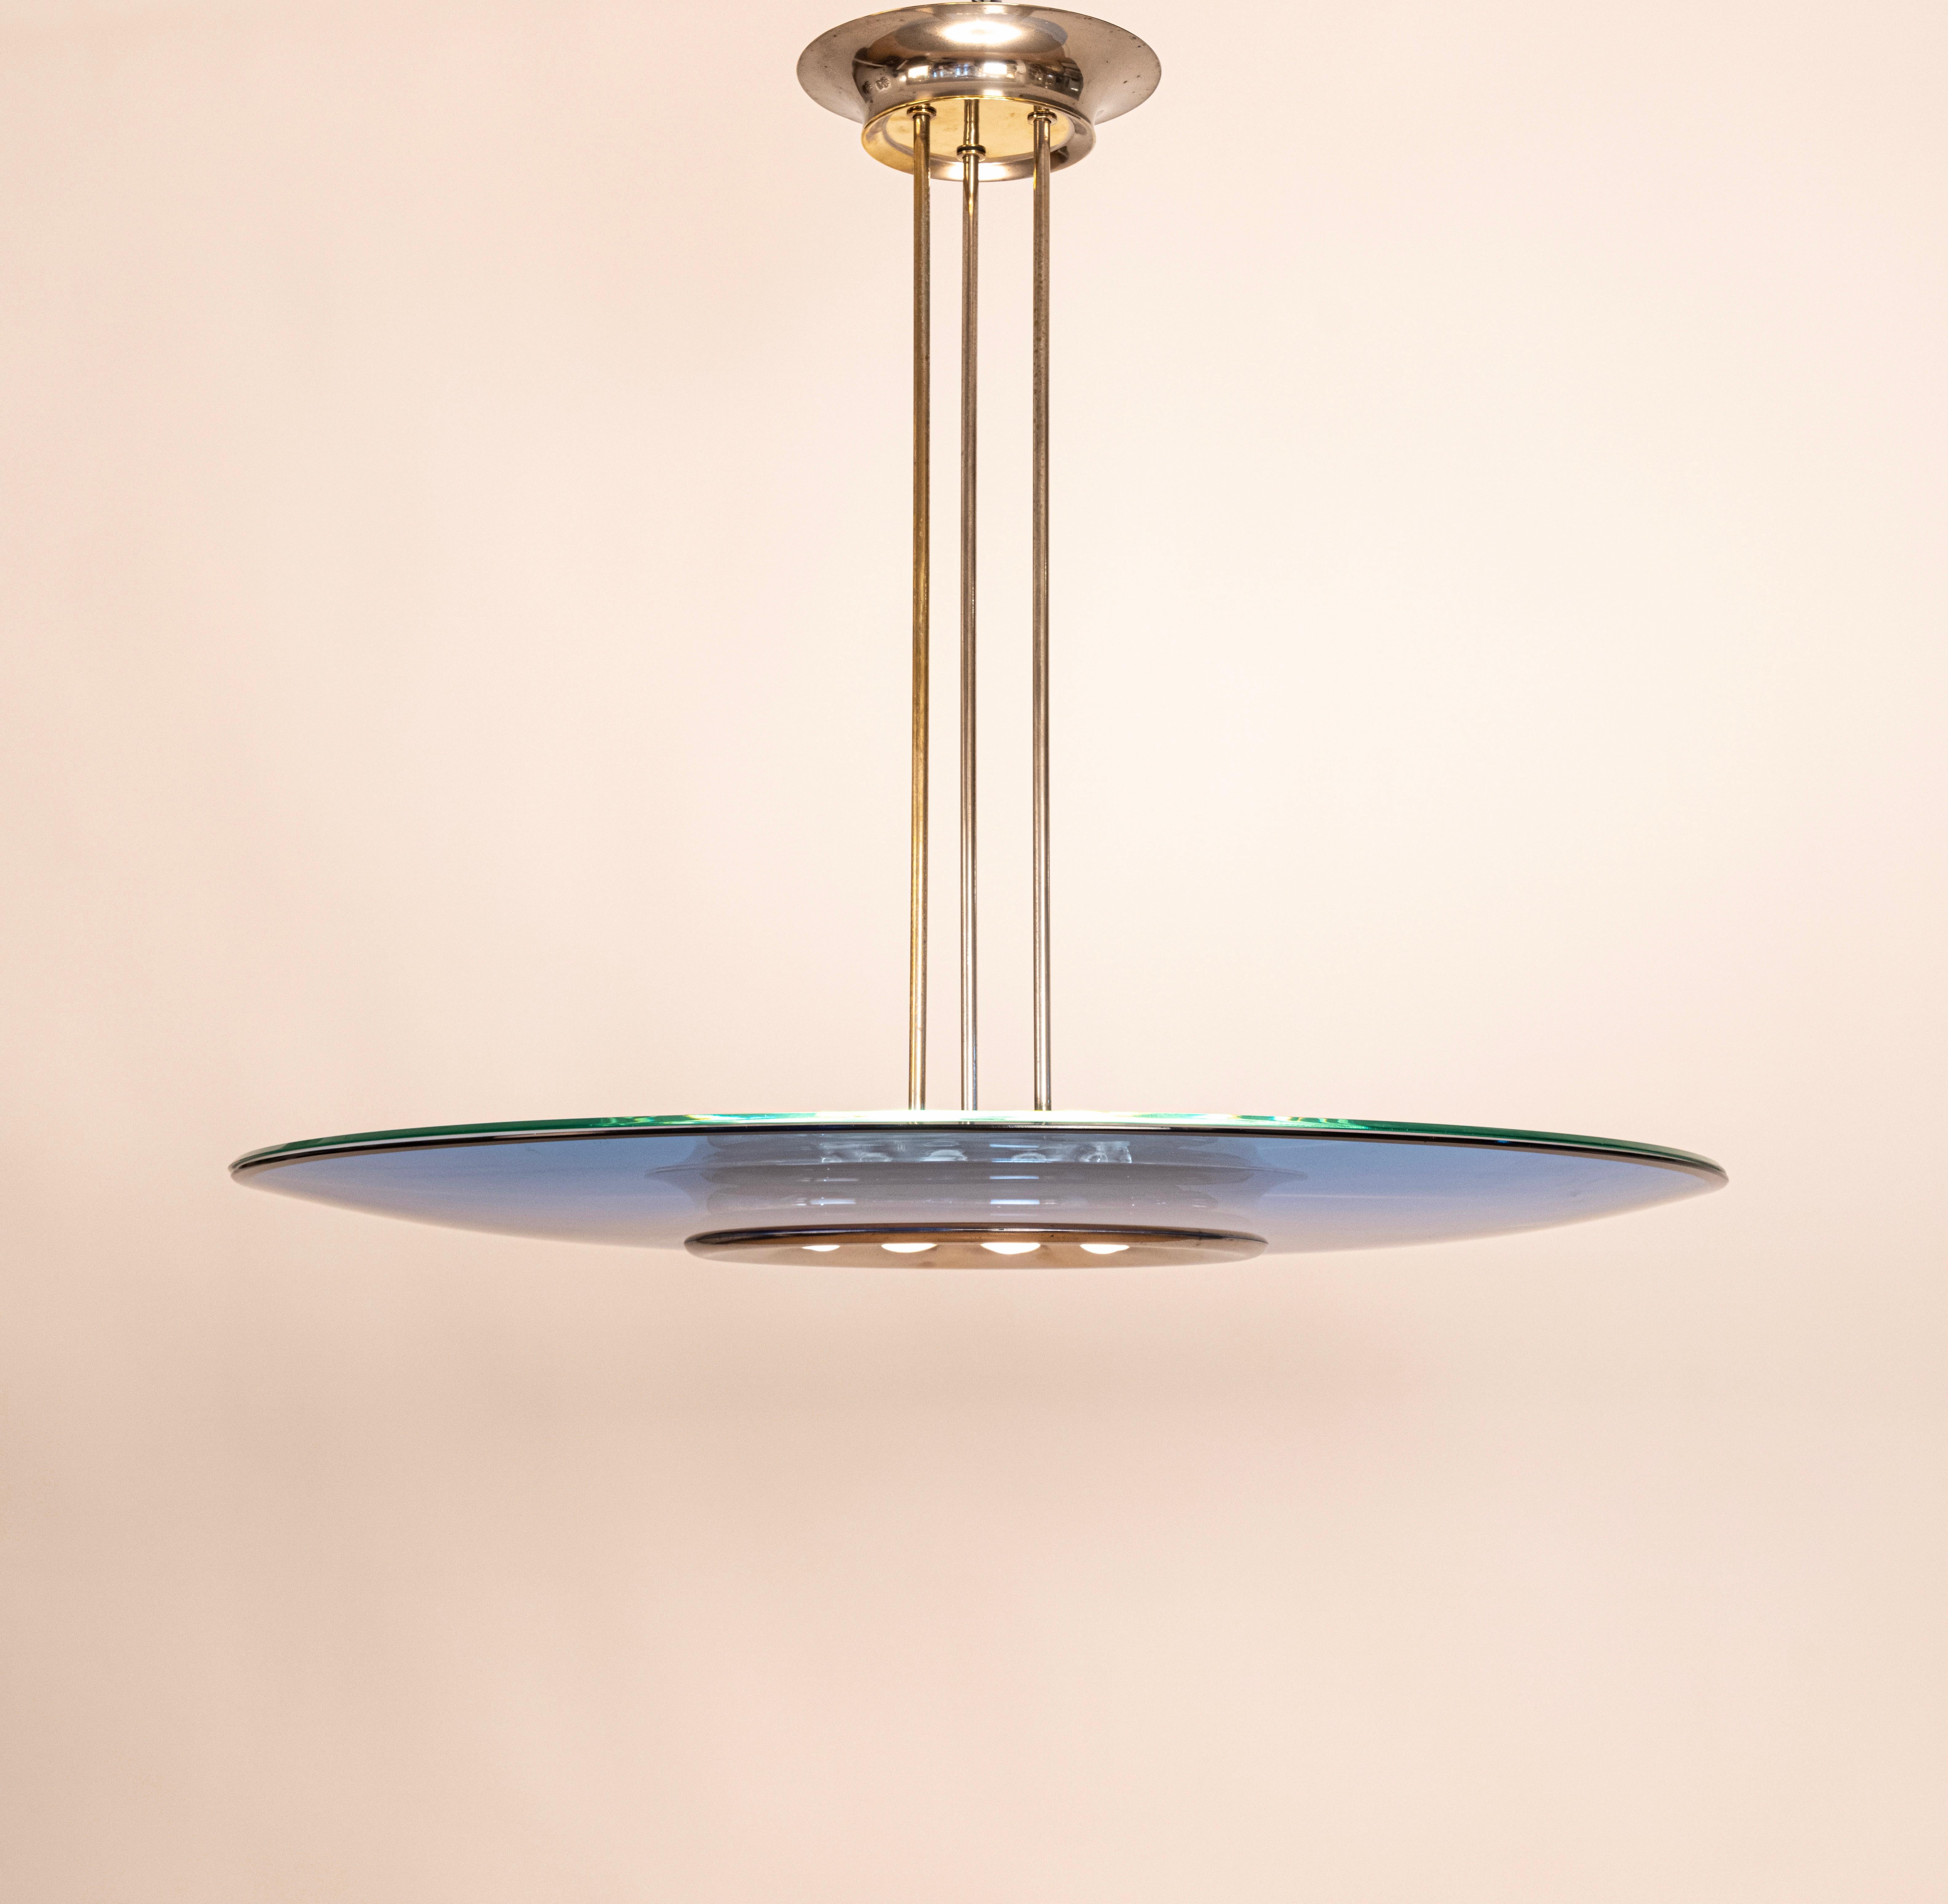 Mod. 1508 Rare Blue Ceiling Light by Max Ingrand for Fontana Arte, Italy, c.1954 In Good Condition For Sale In London, GB